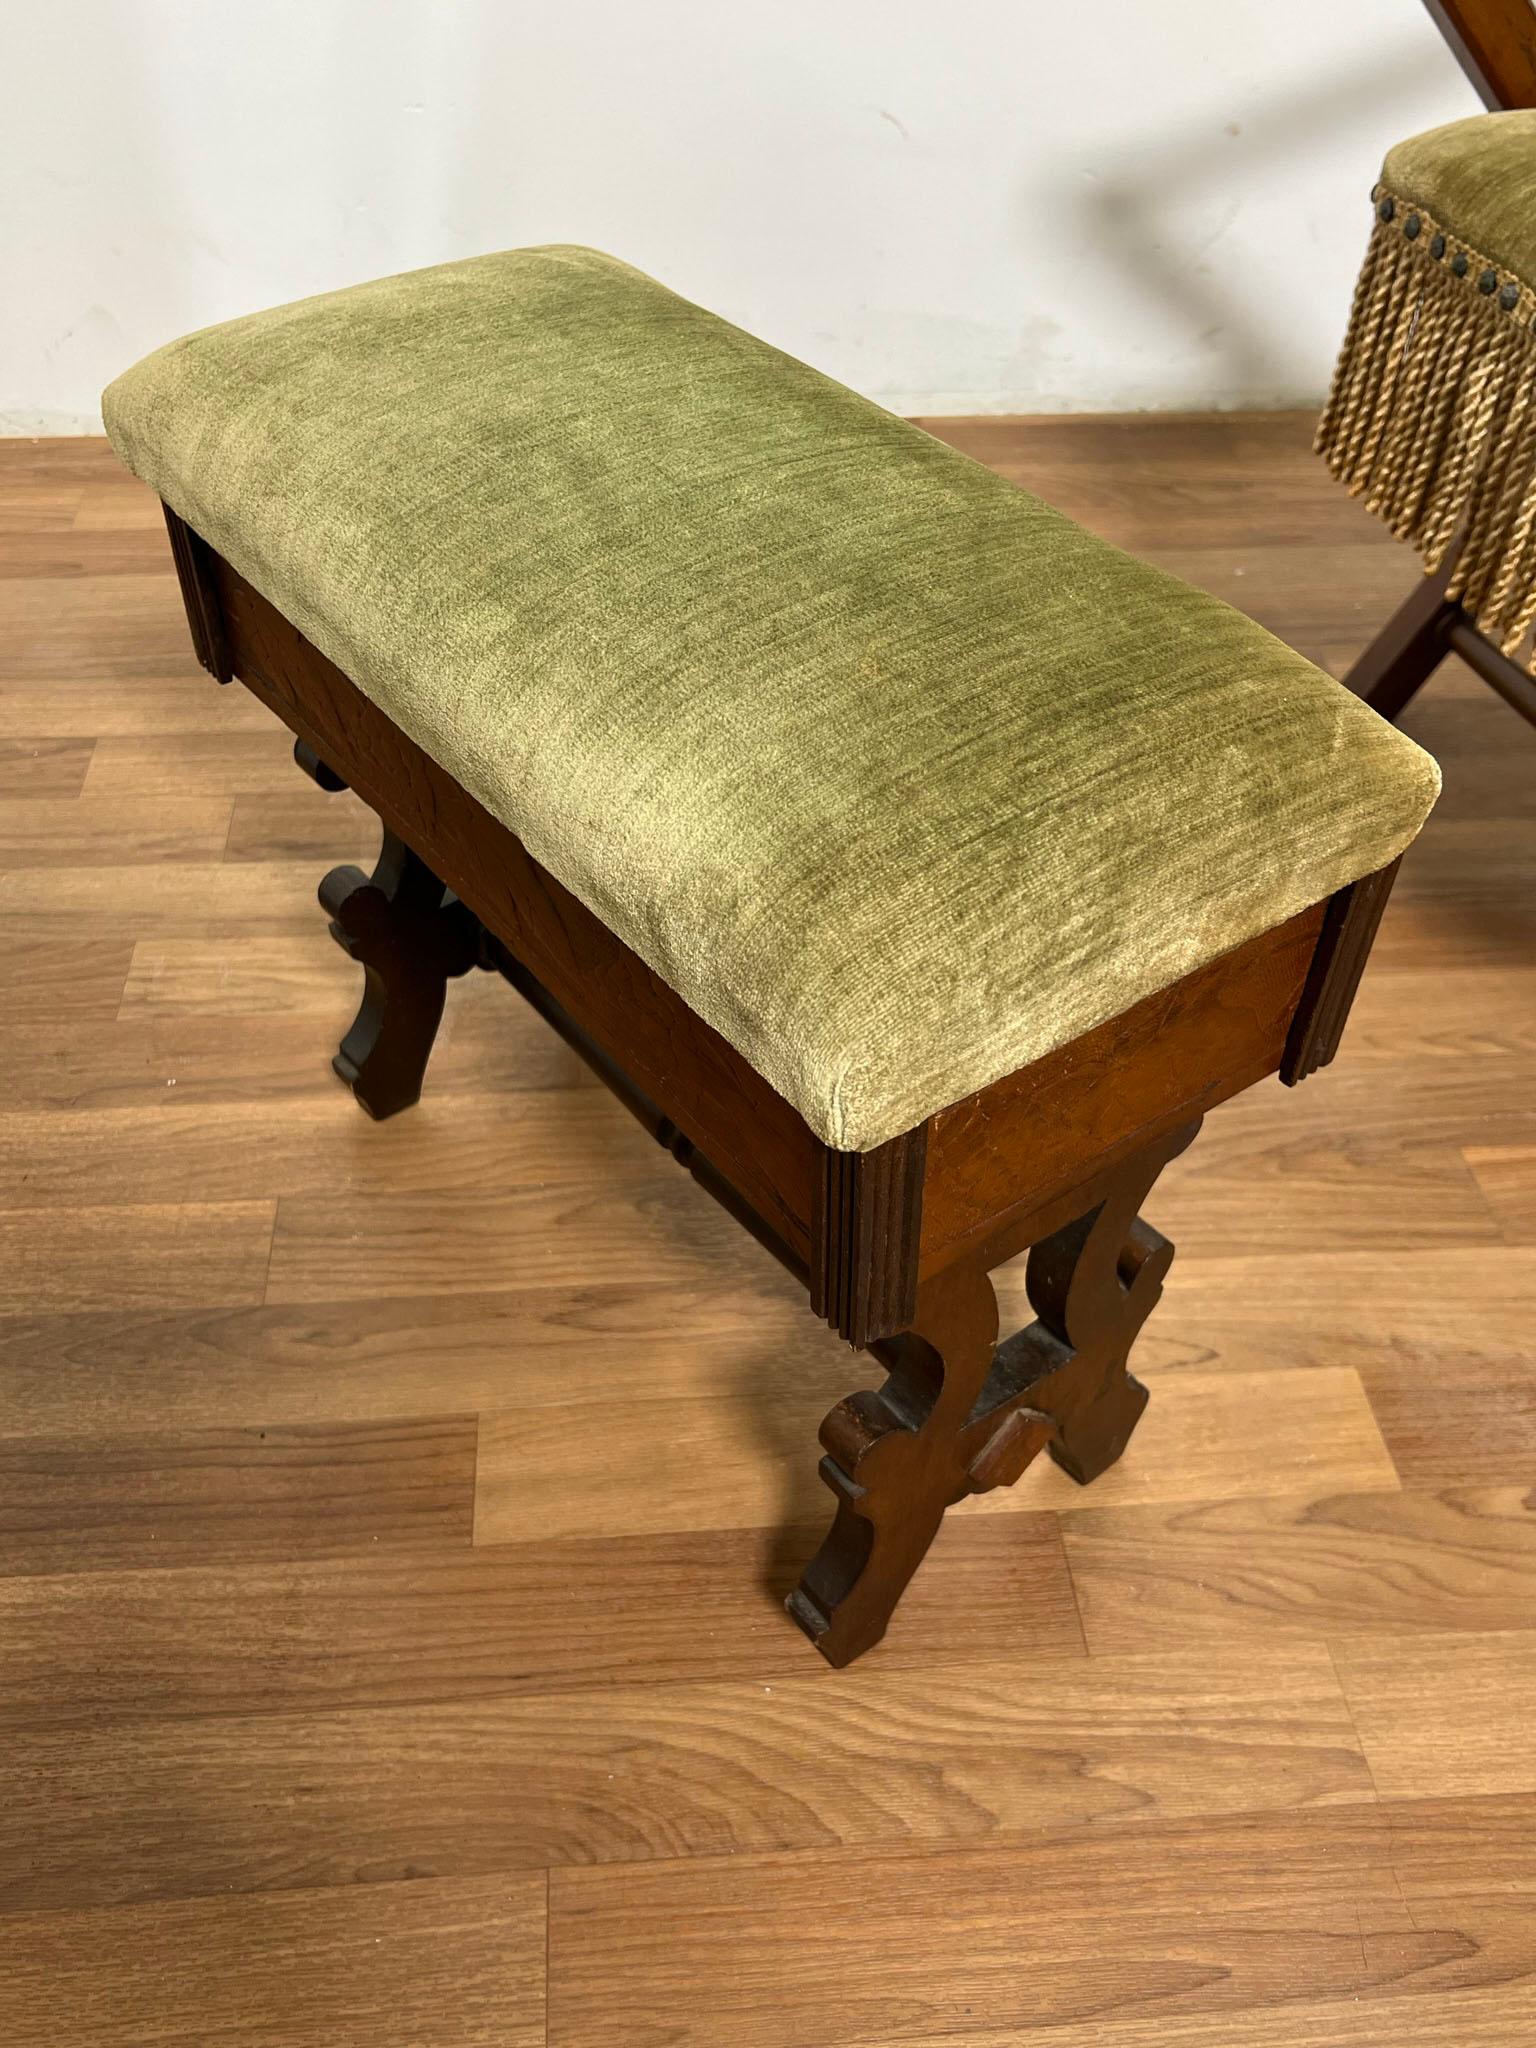 Victorian Era Campaign Chair with Lidded Ottoman, circa 1890s For Sale 10